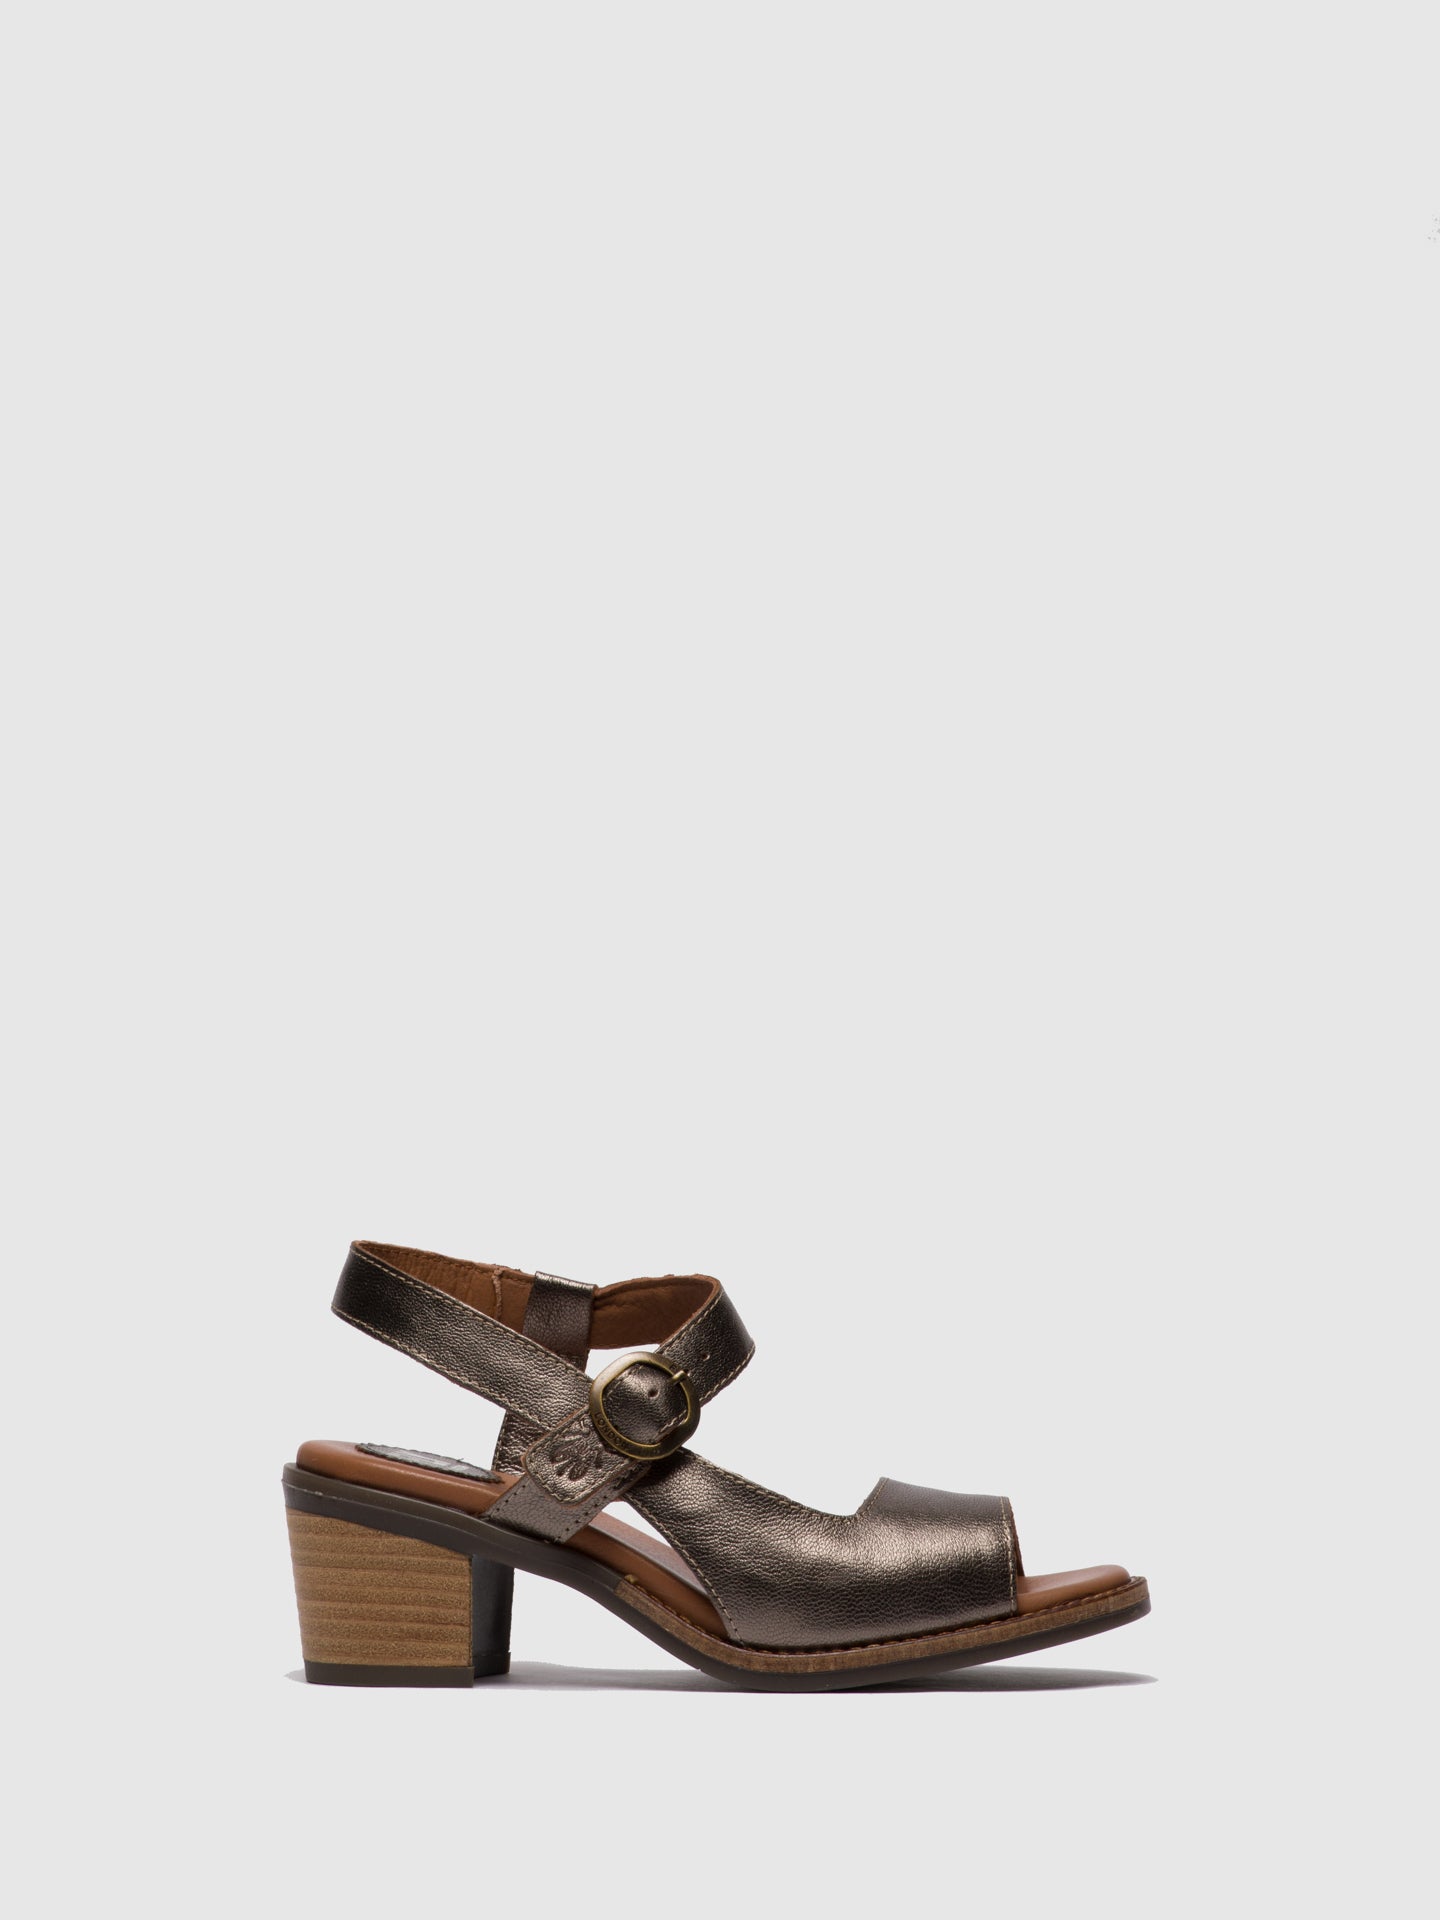 Buy Heel & Buckle London Brown Monk Shoes for Men at Best Price @ Tata CLiQ